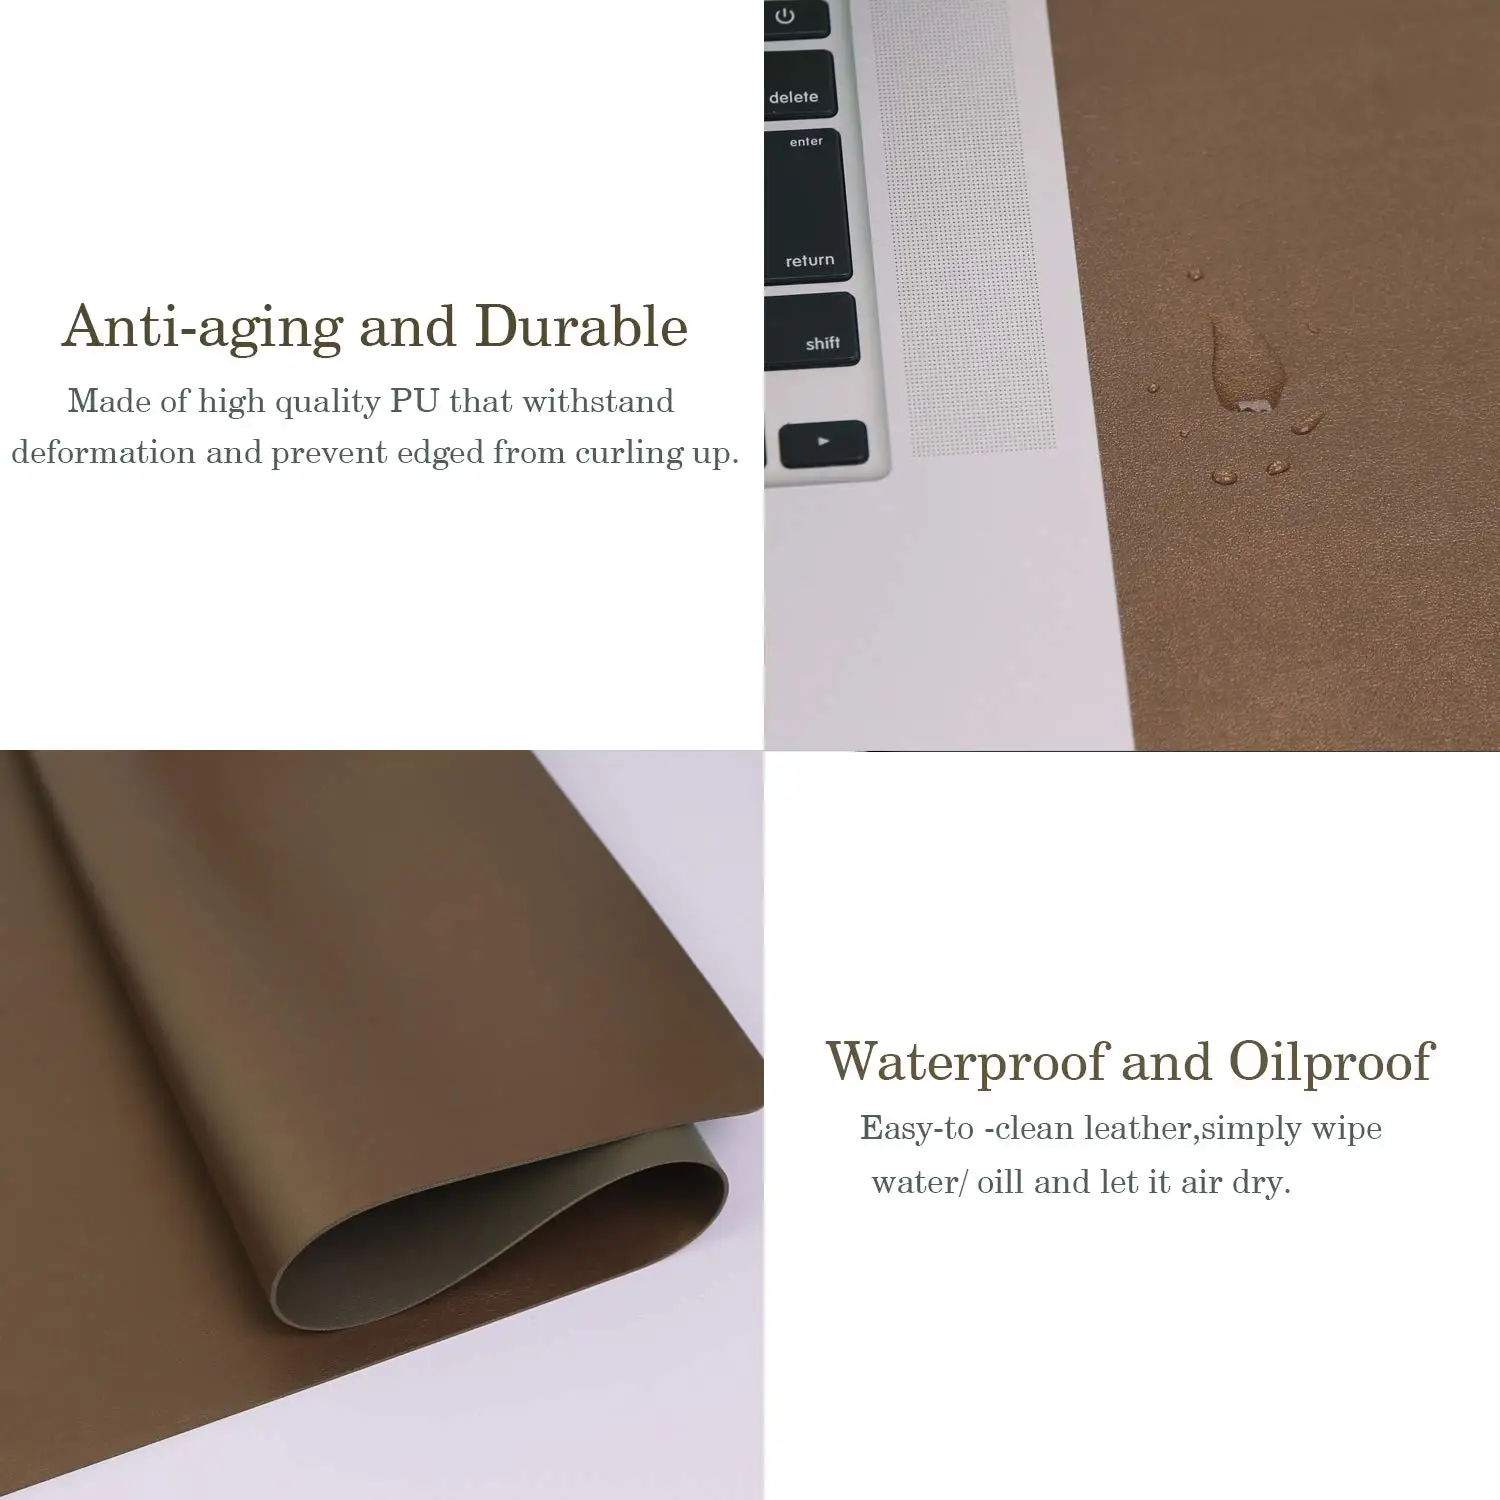 Multifunctional Office Desk Pad, 40*80cm Ultra Thin Waterproof PU Leather Mouse Pad, Dual Use Desk Writing Mat for Office/Home